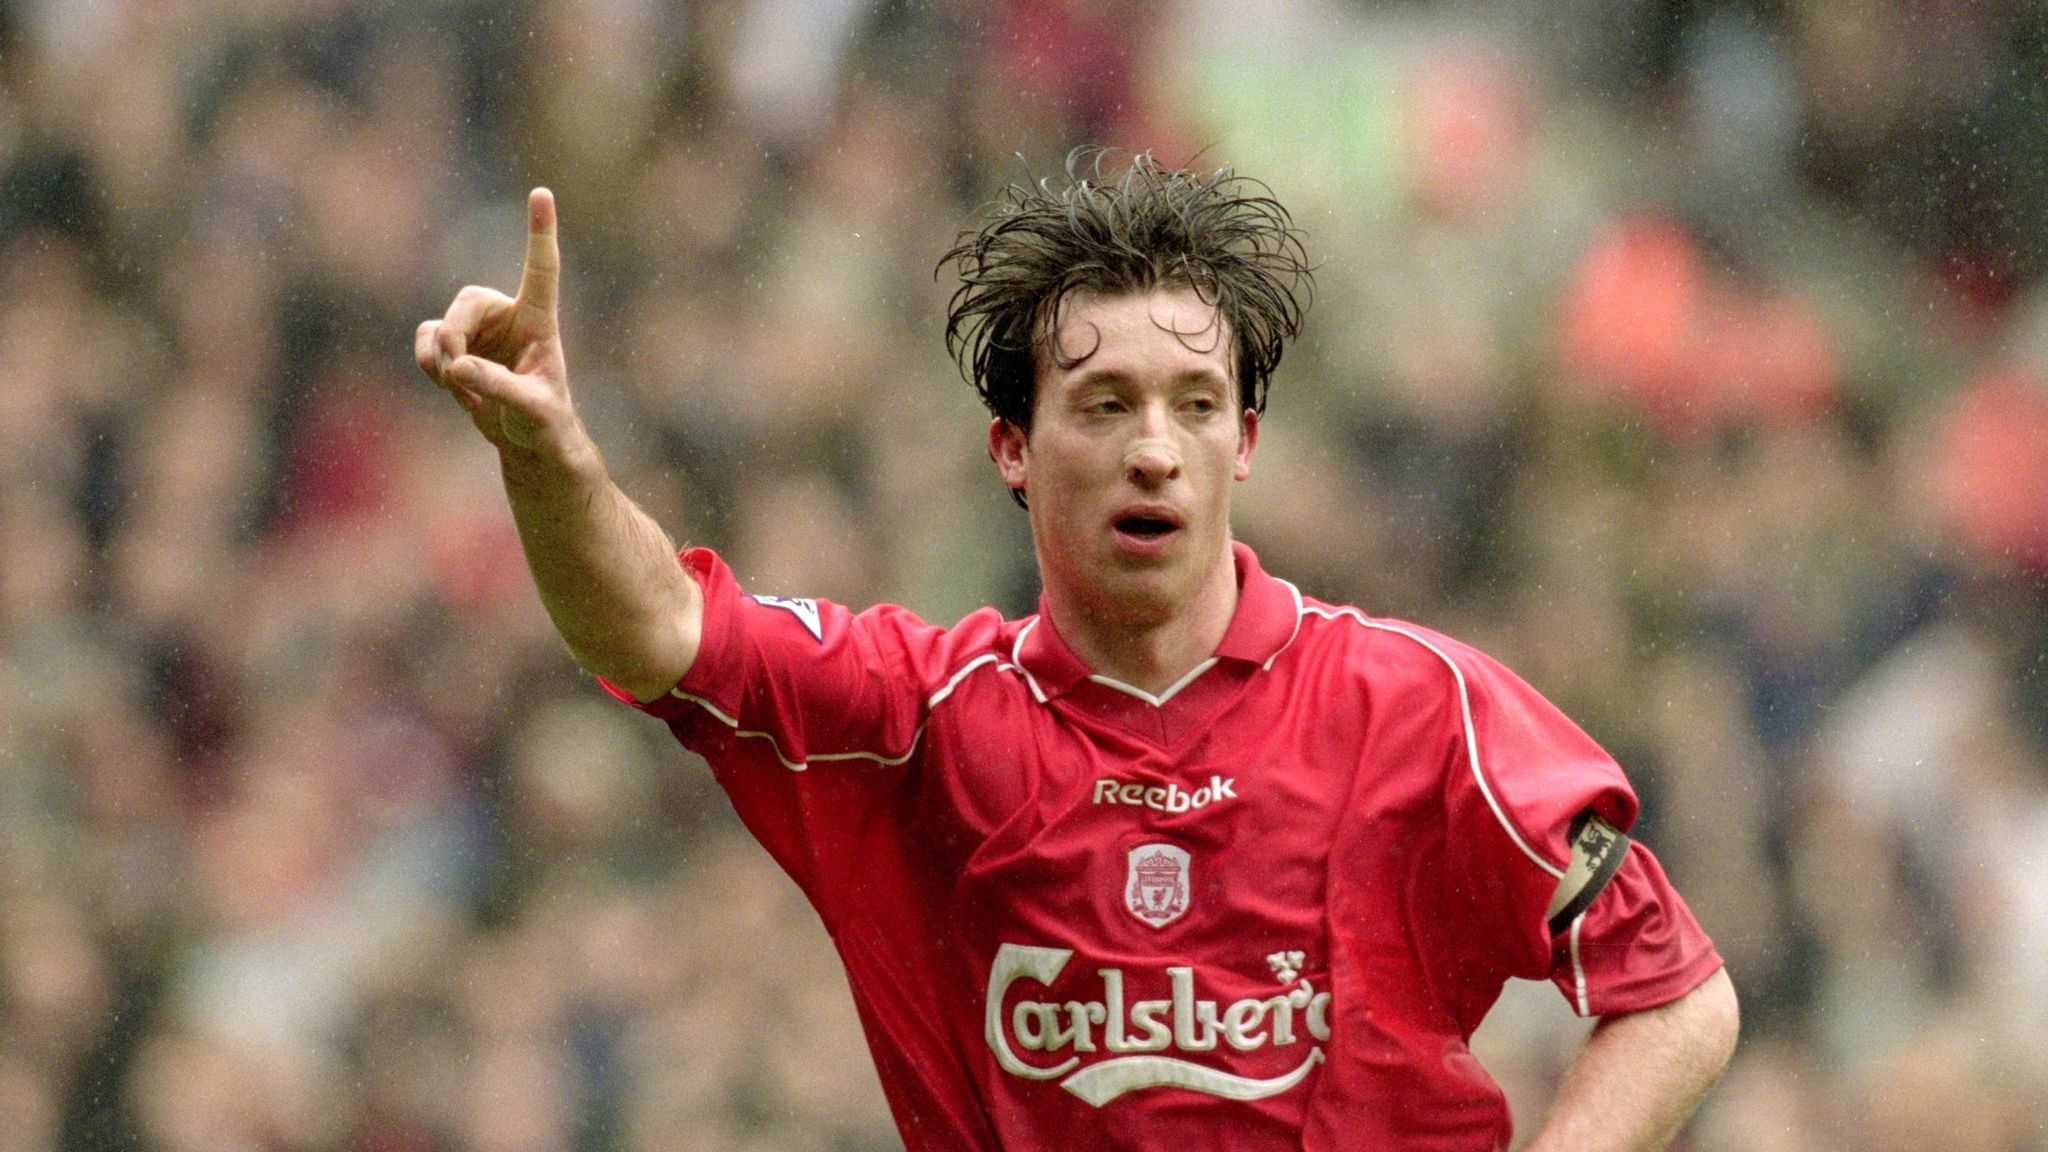 Robbie Fowler doing Pro Licence in bid to become manager | Football News | Sky Sports